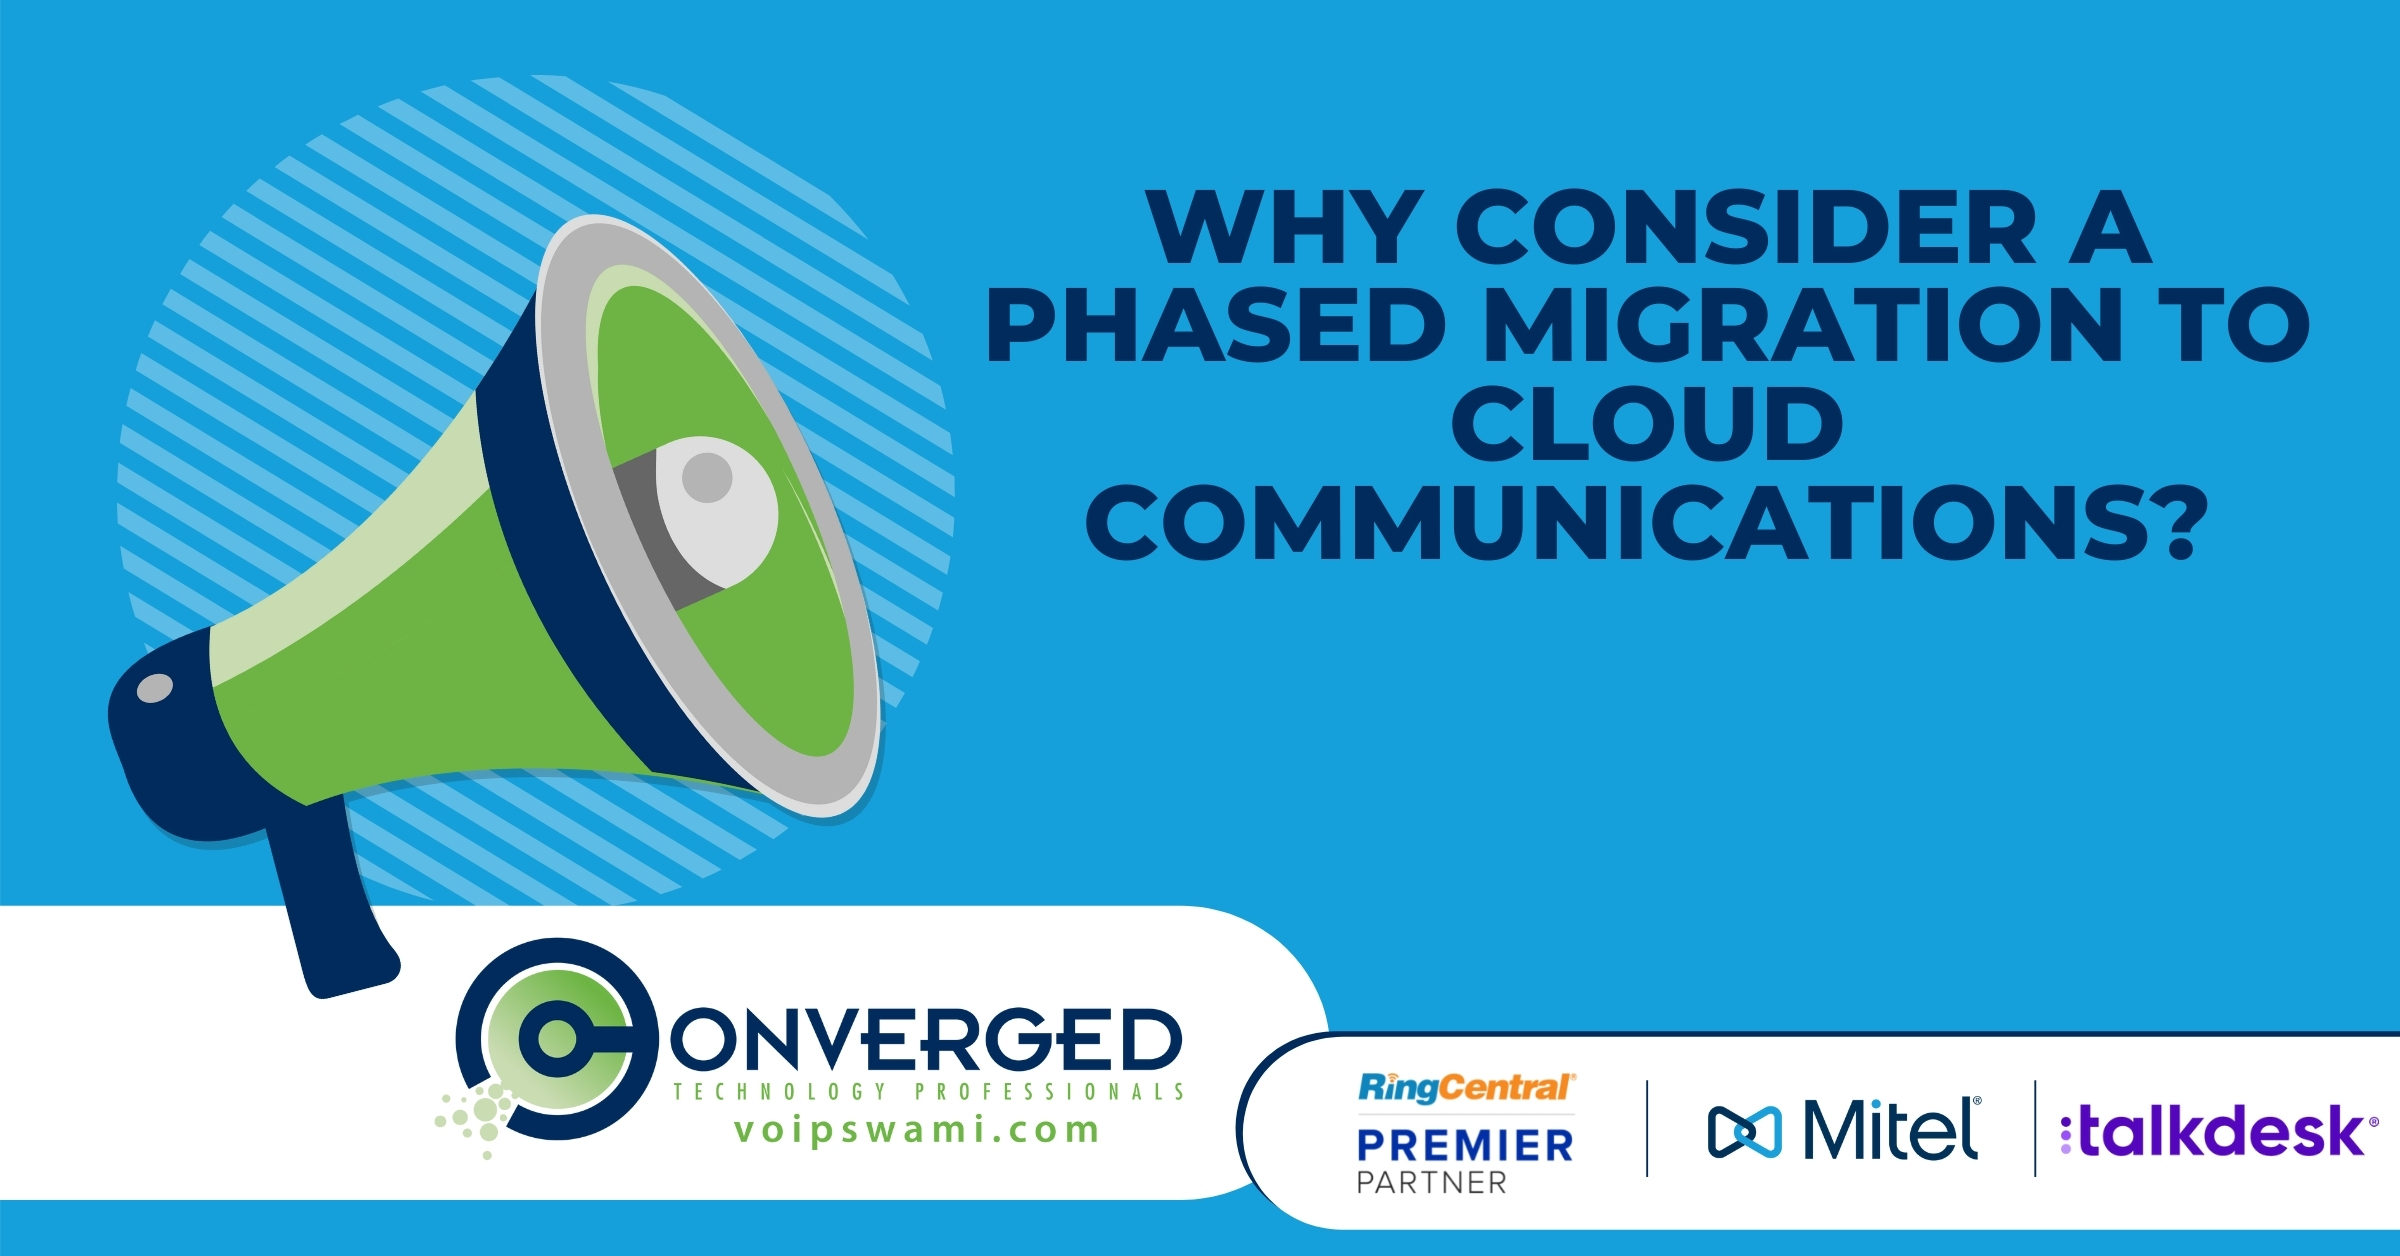 Why Consider a Phased Migration to Cloud Communications